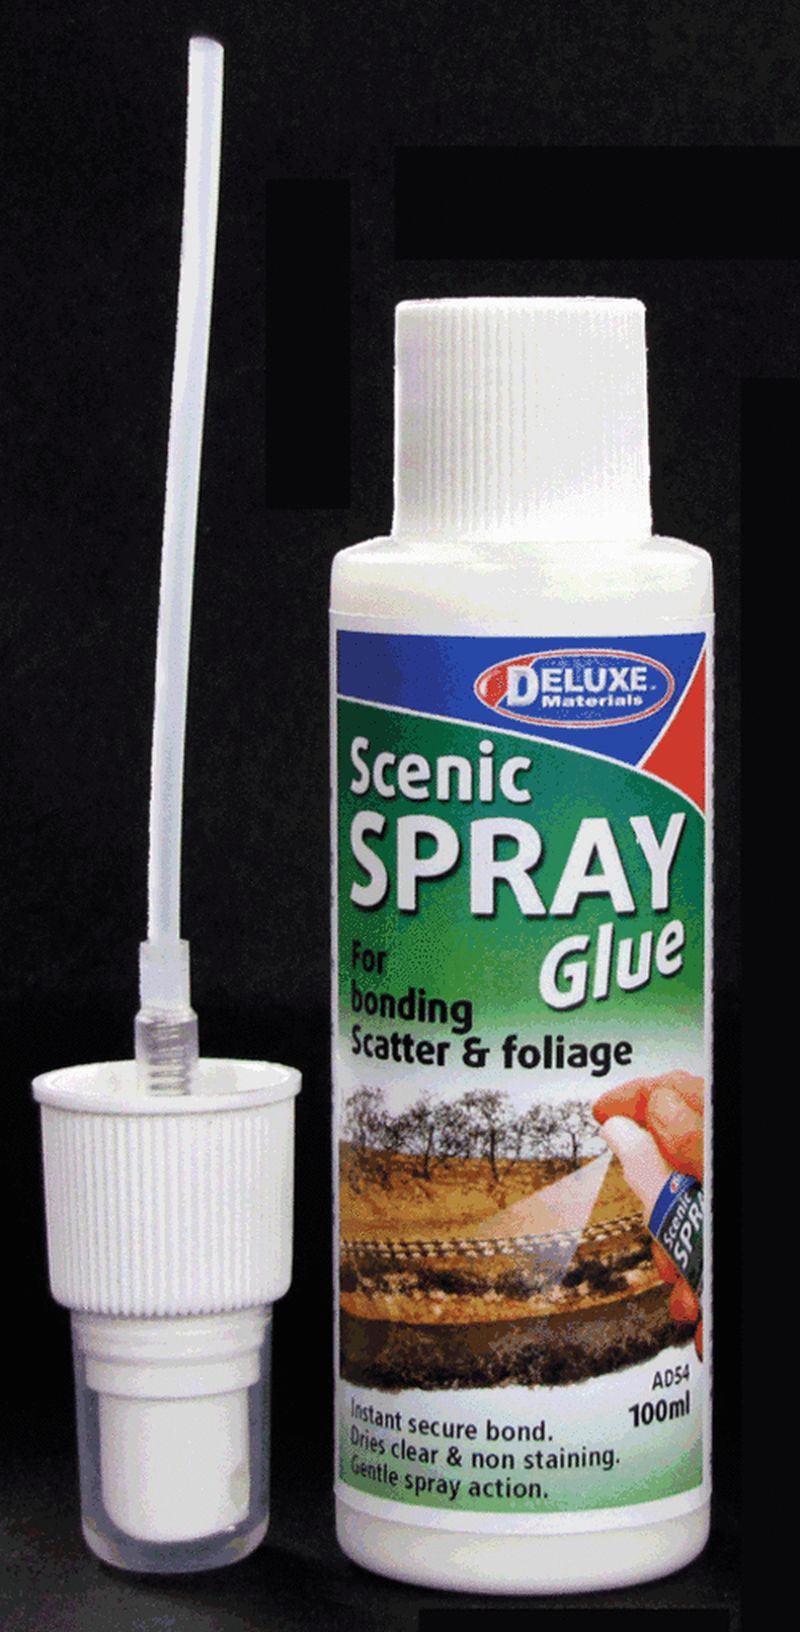 Scenic Spray Glue (100ml) by Deluxe Materials